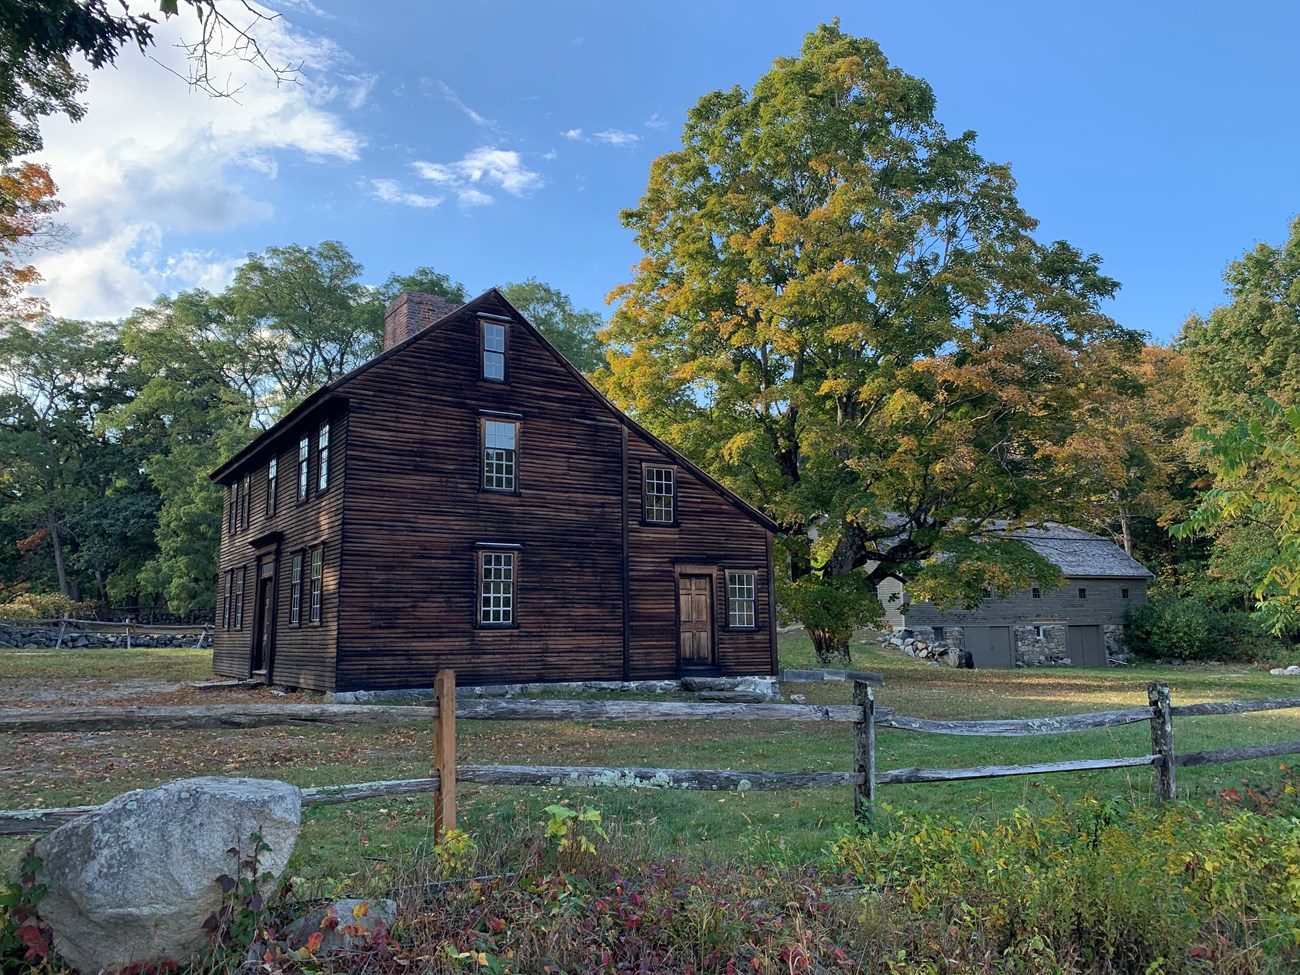 A side view of a two story salt-box style house made of brown wood. A large tree towers over the rear of the house and a wooden barn in seen in the distance. orange, red, and brown leaves indicate autumn.